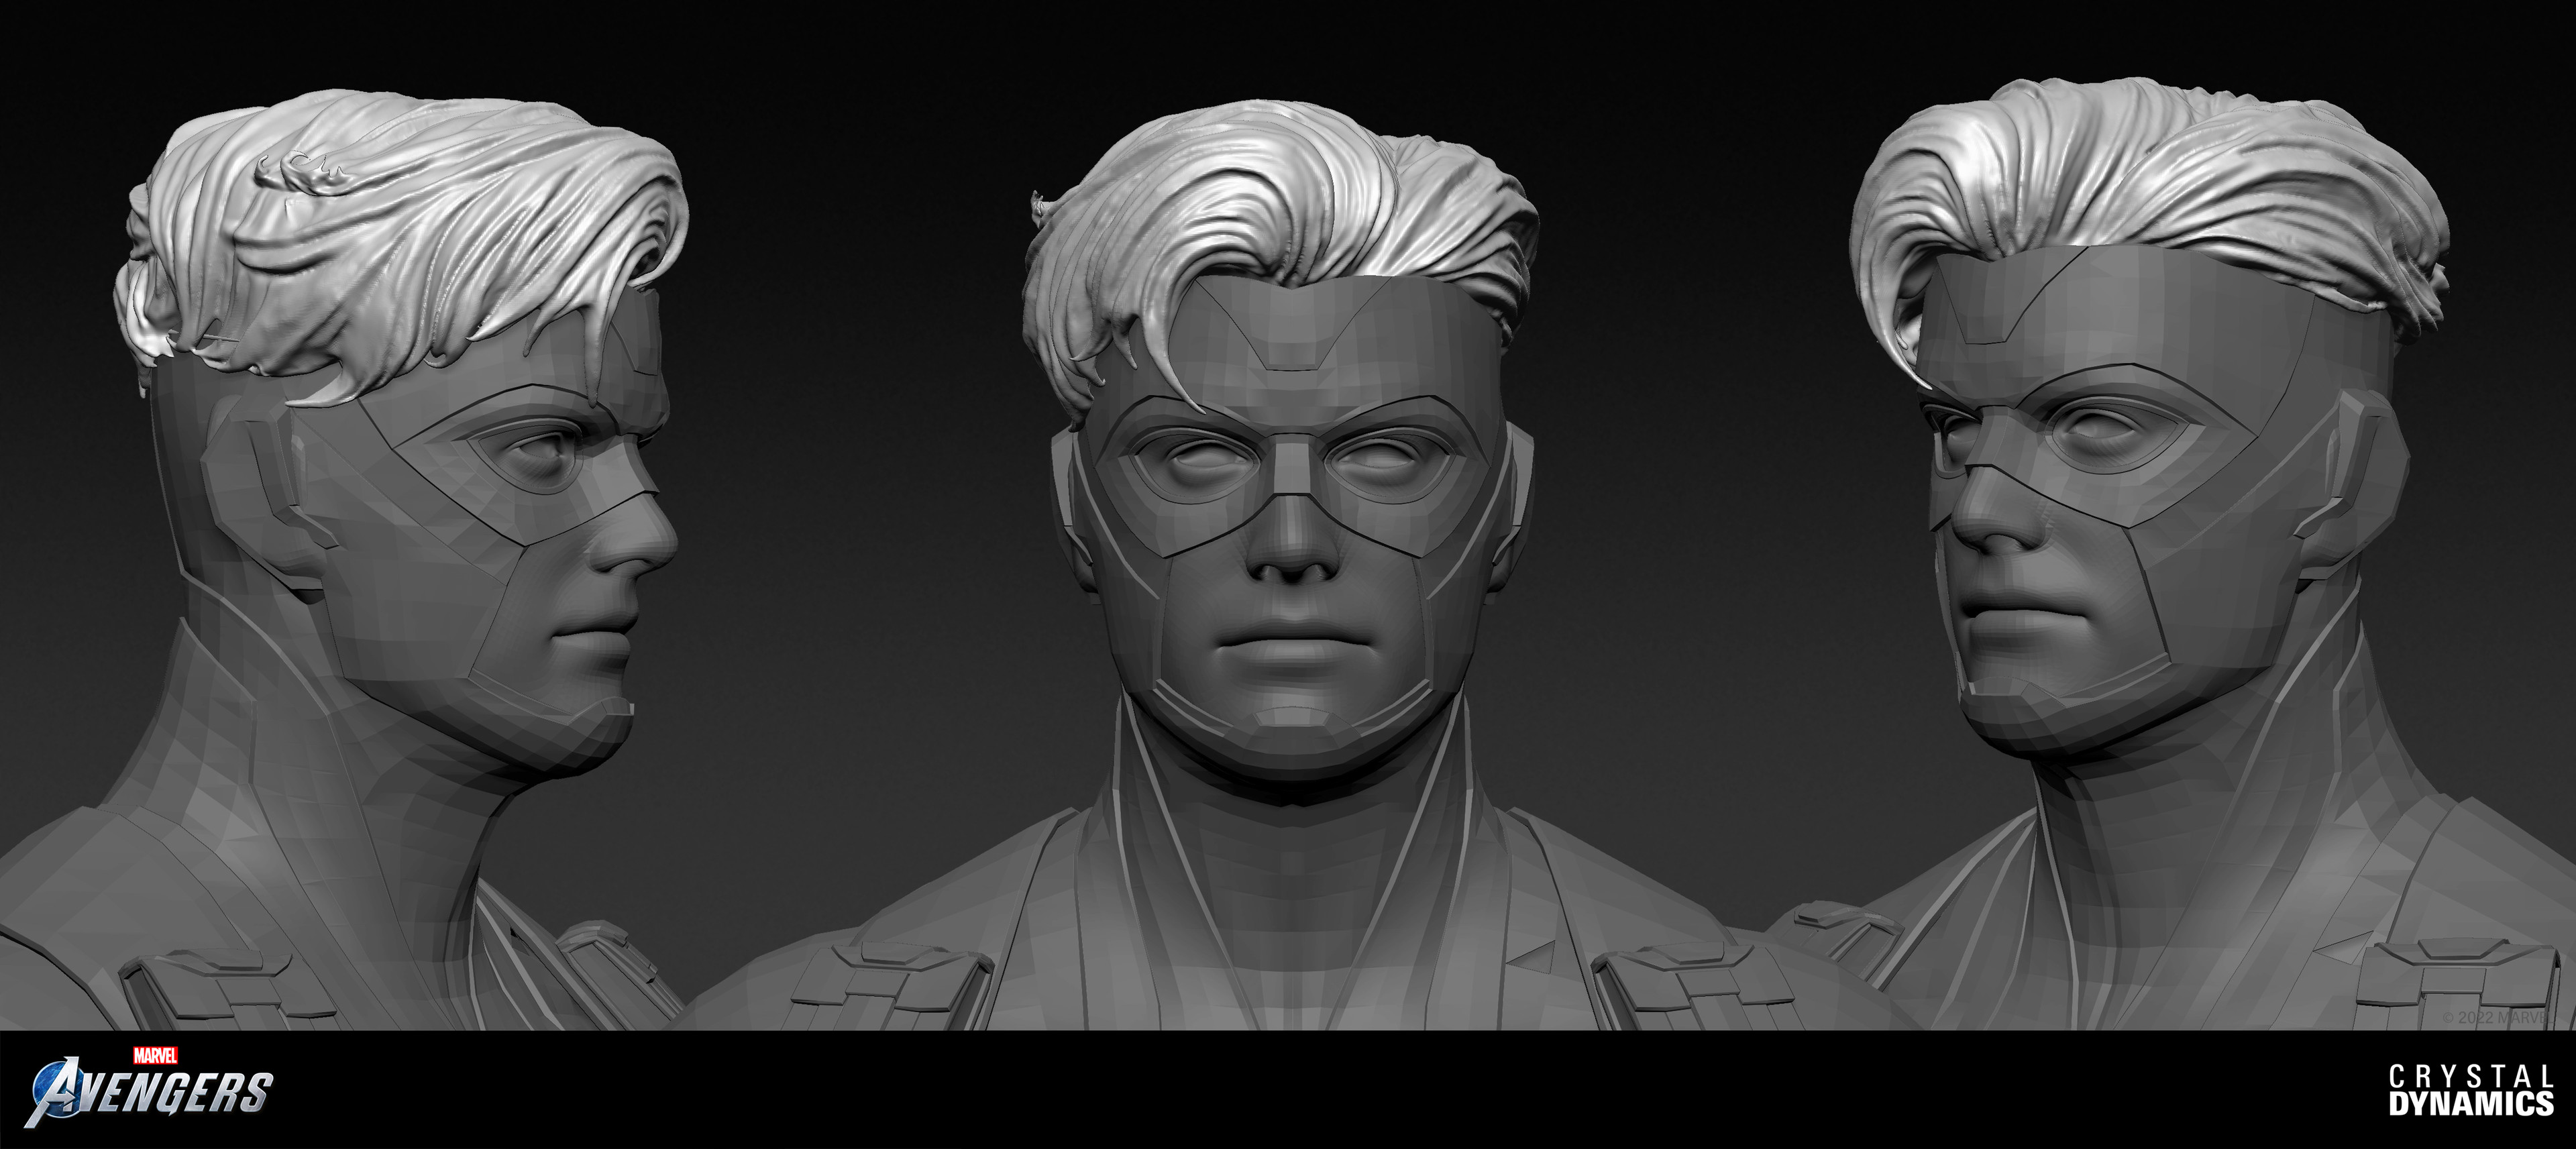 ZBrush blockout used as a rough sketch to indicate hair volume and flow.